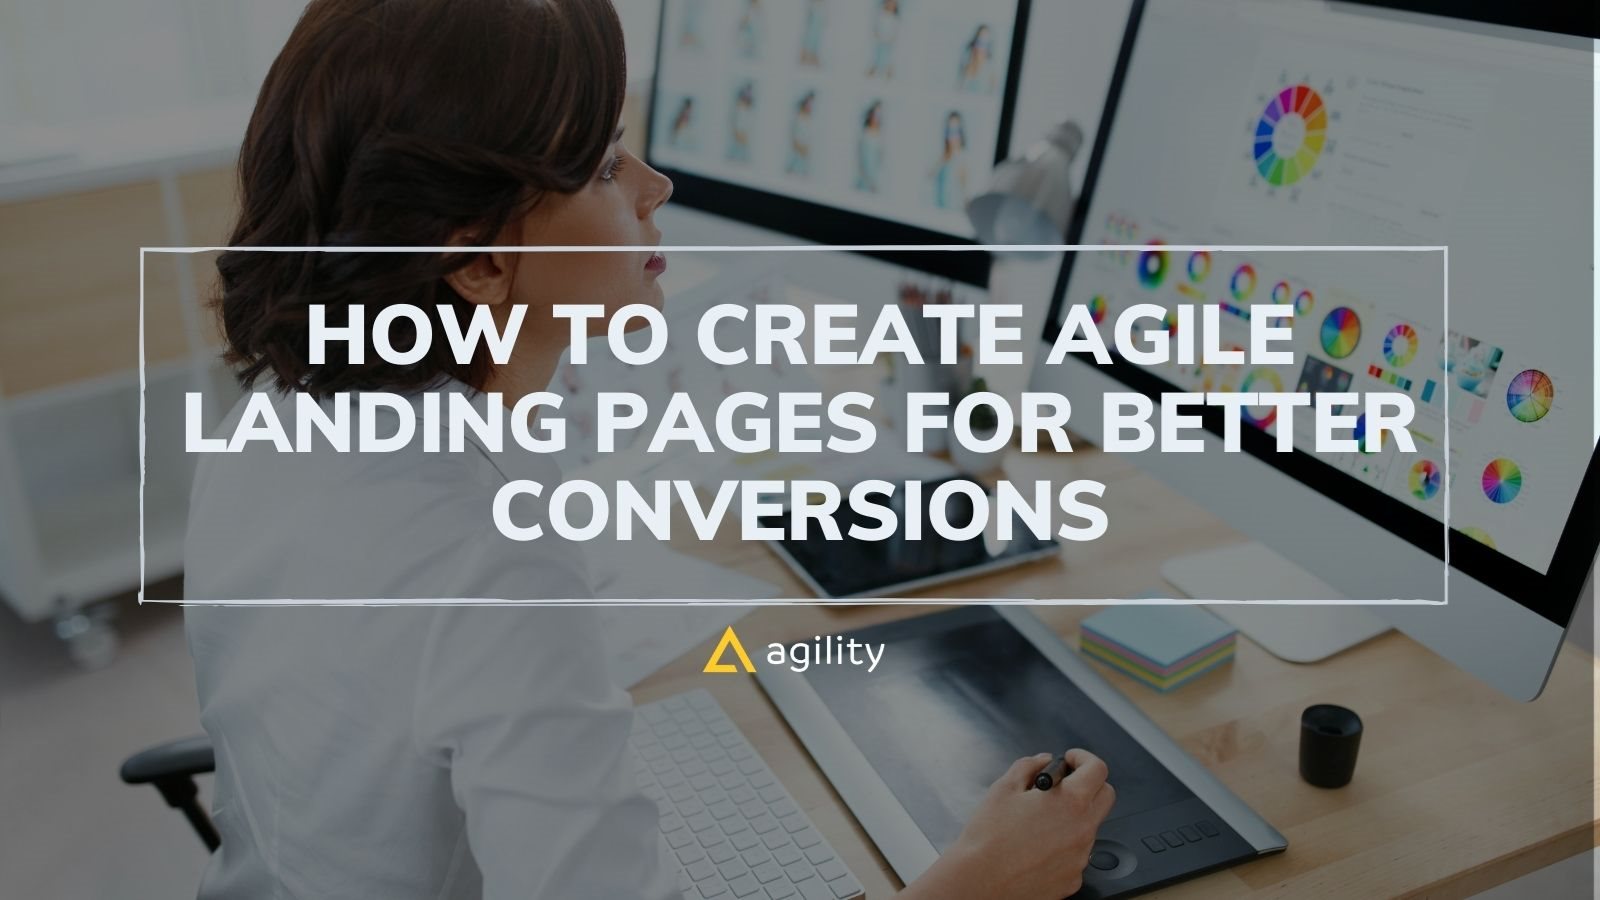 How to Create Agile Landing Pages for Better Conversions